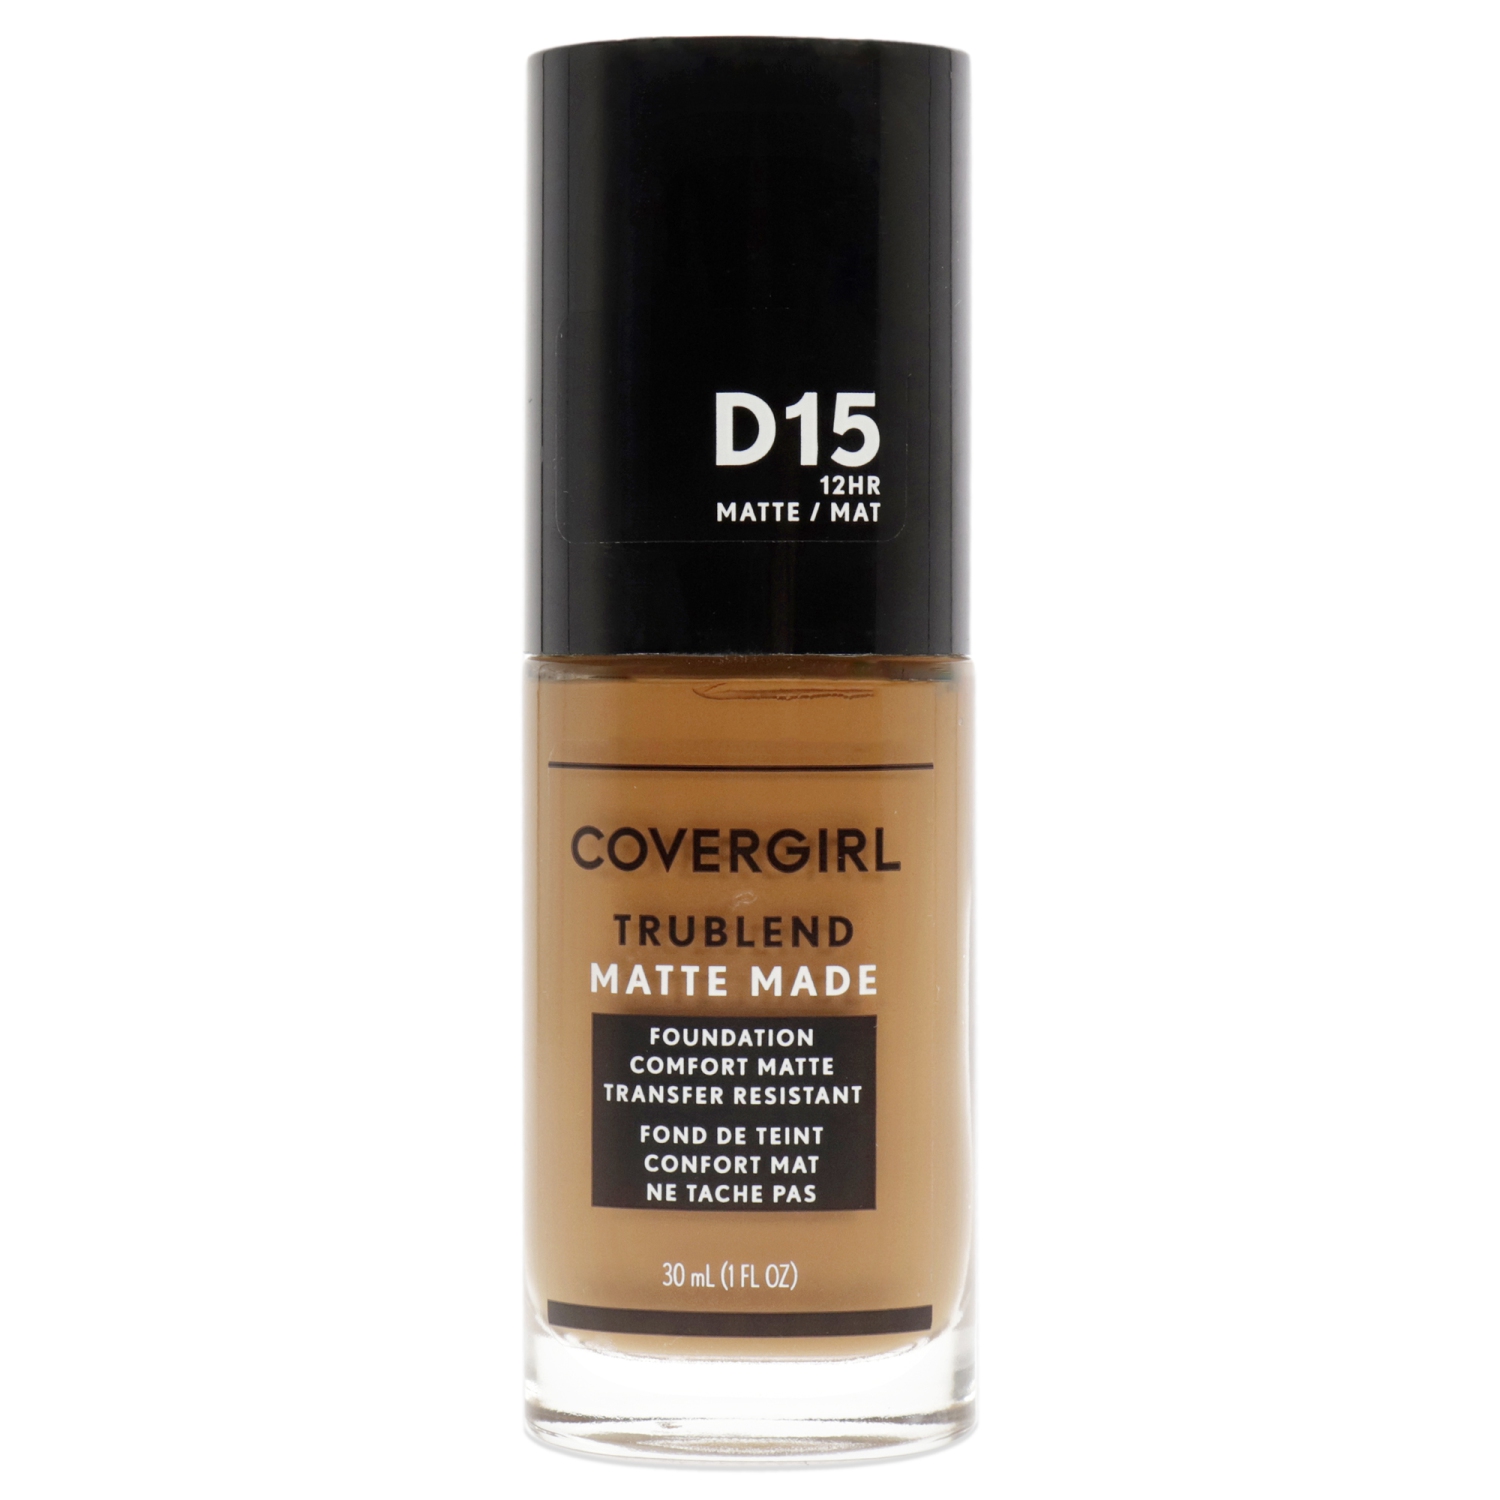 TruBlend Matte Made Liquid Foundation - D15 Warm Tawny by CoverGirl for Women - 1 oz Foundation